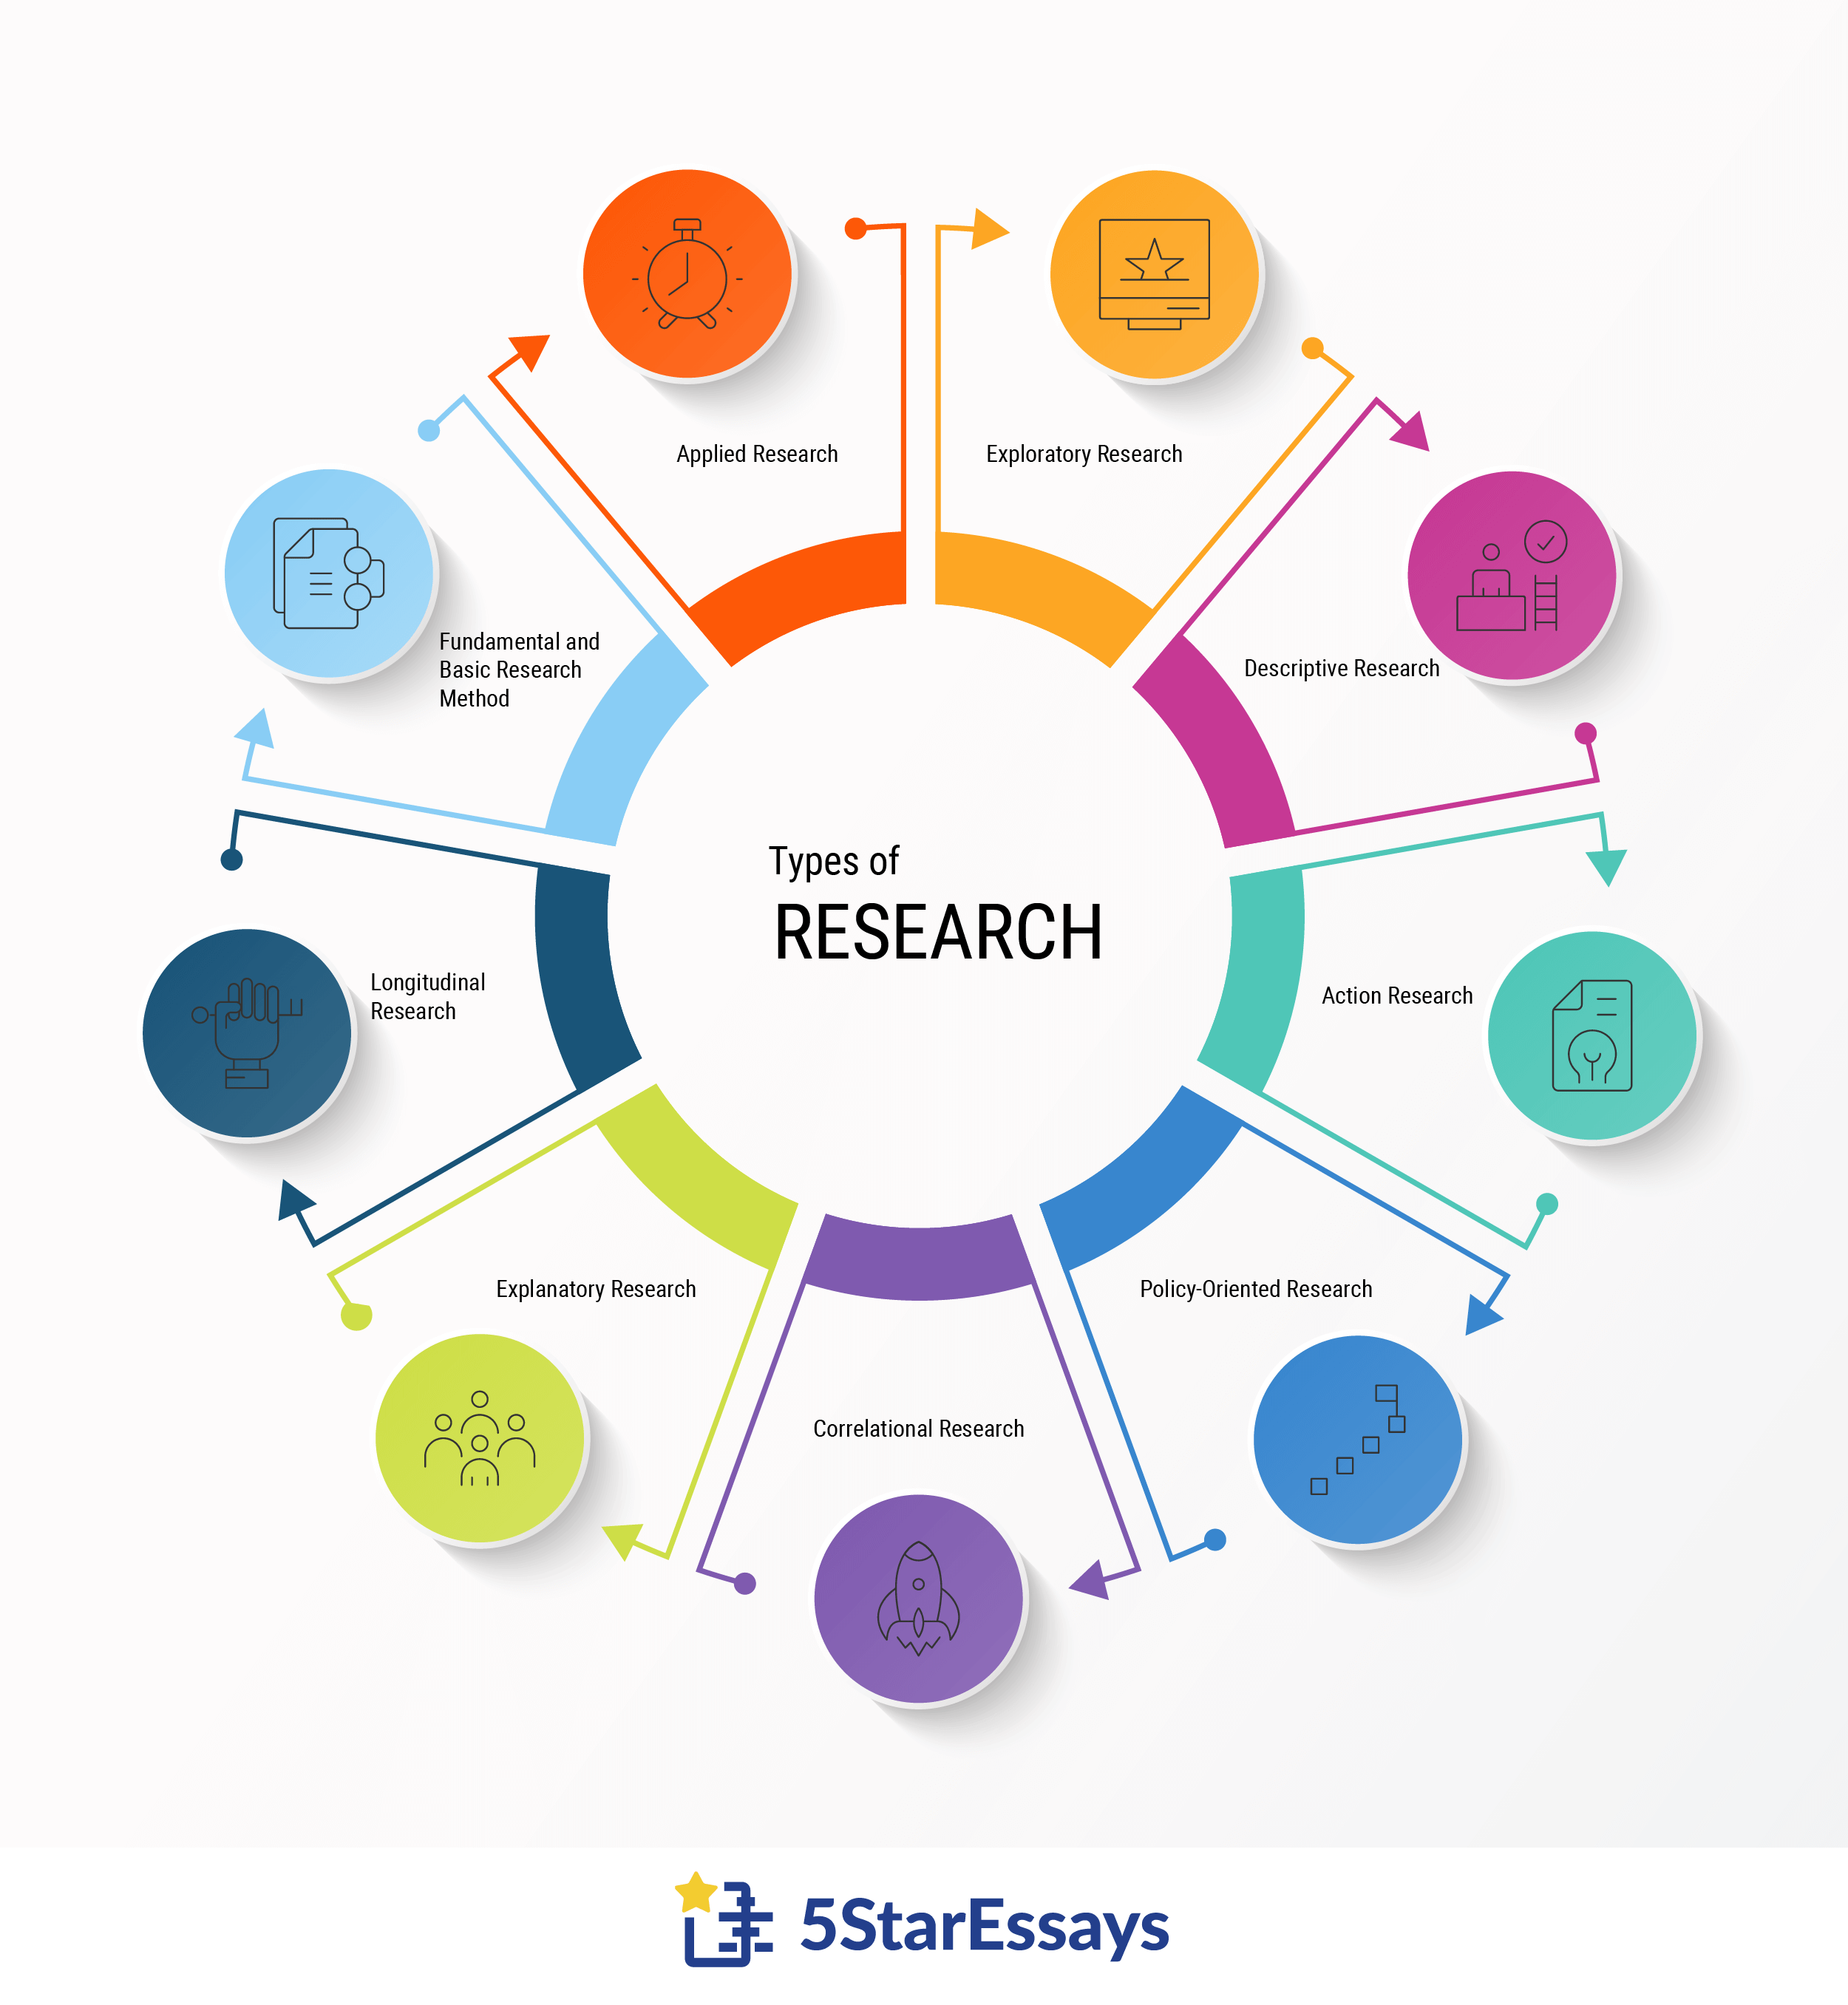 how to make a graphical presentation of the type of research which interest you the most